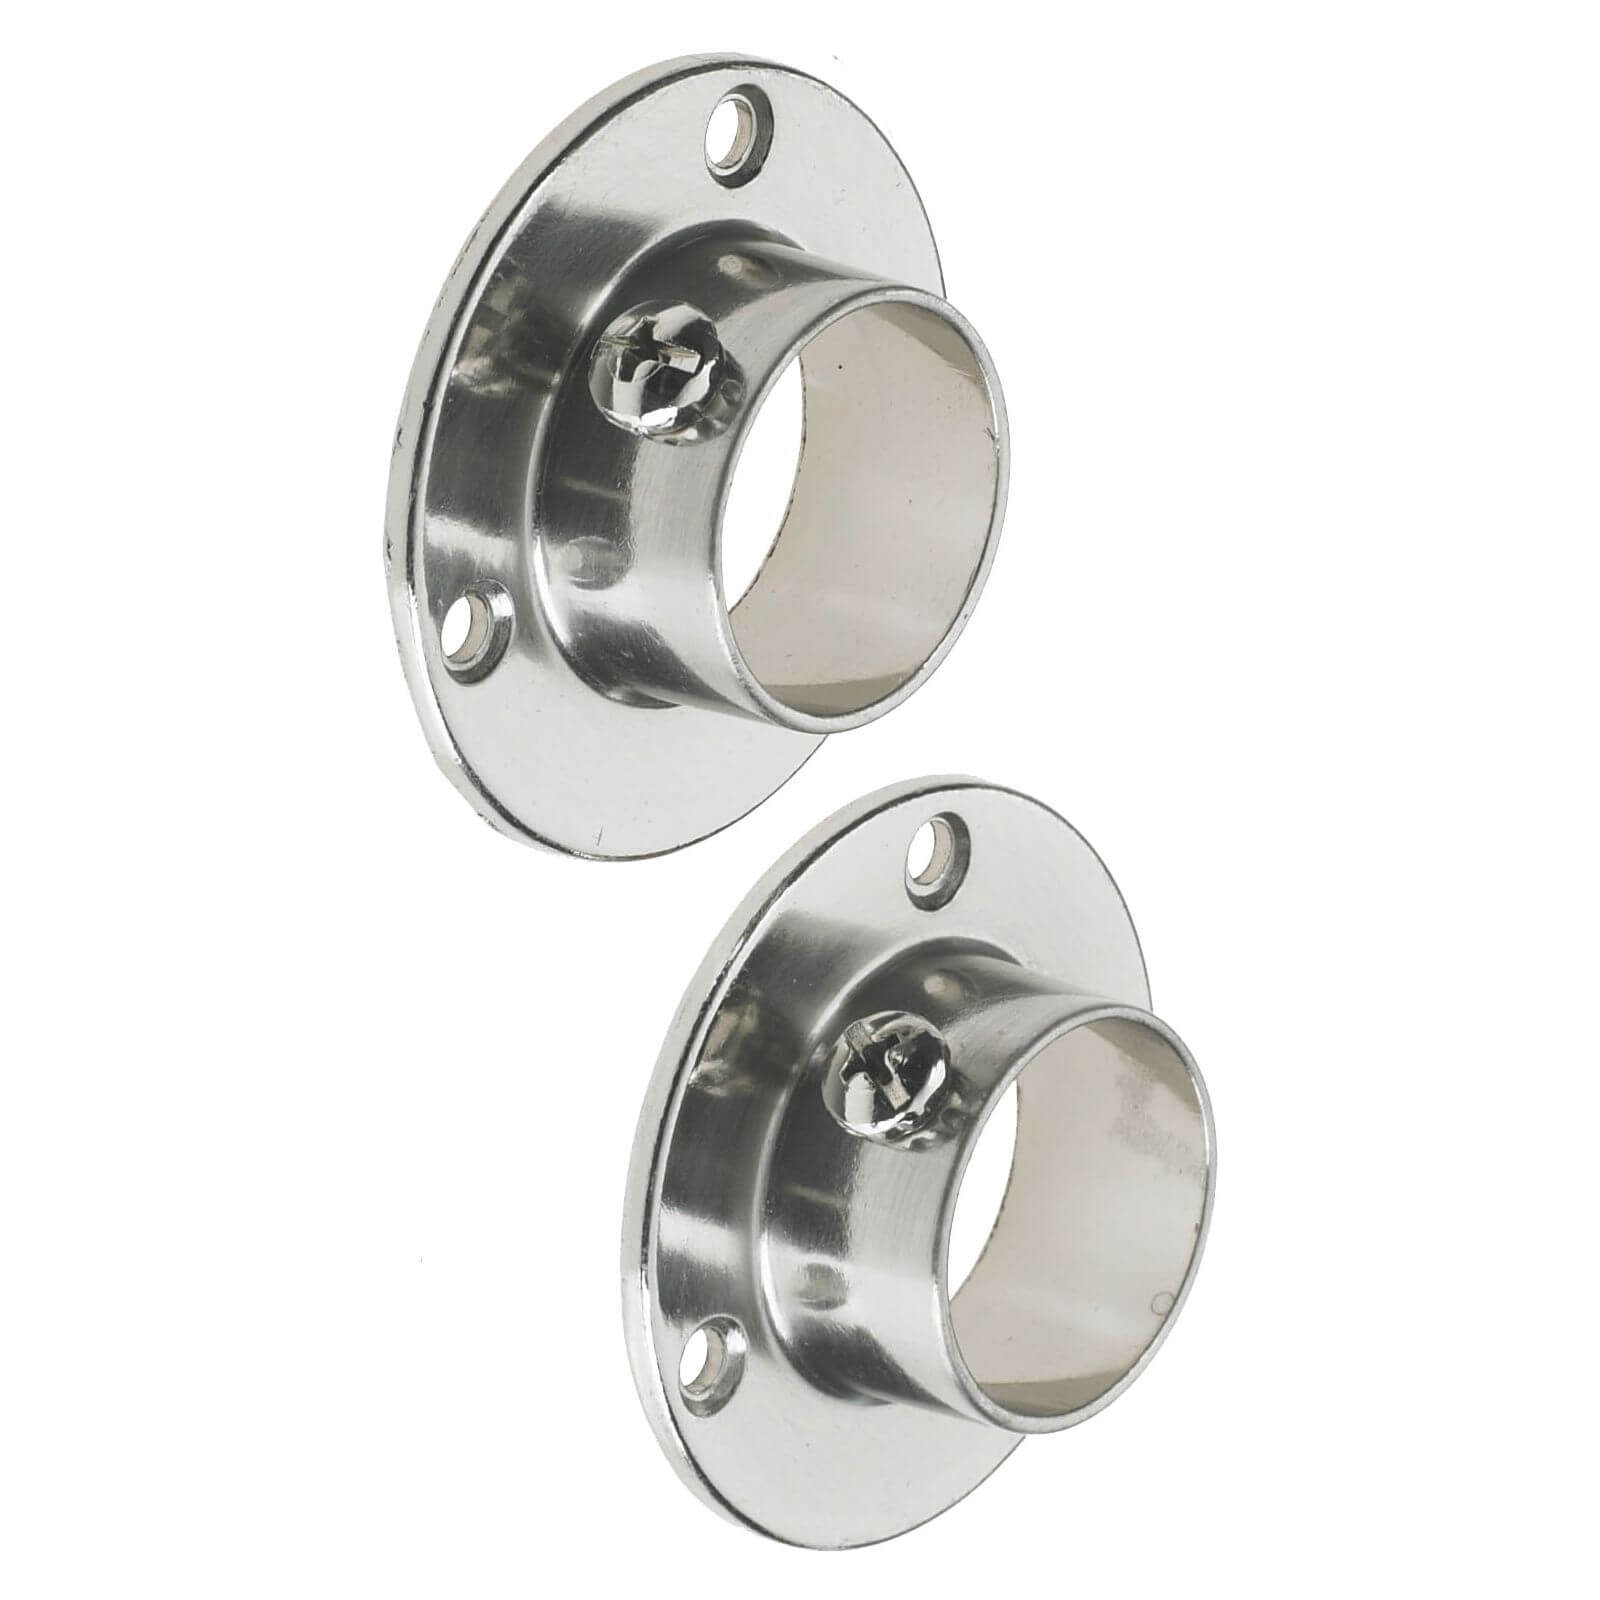 Photo of Super Deluxe Sockets - Brushed Nickel - 25mm